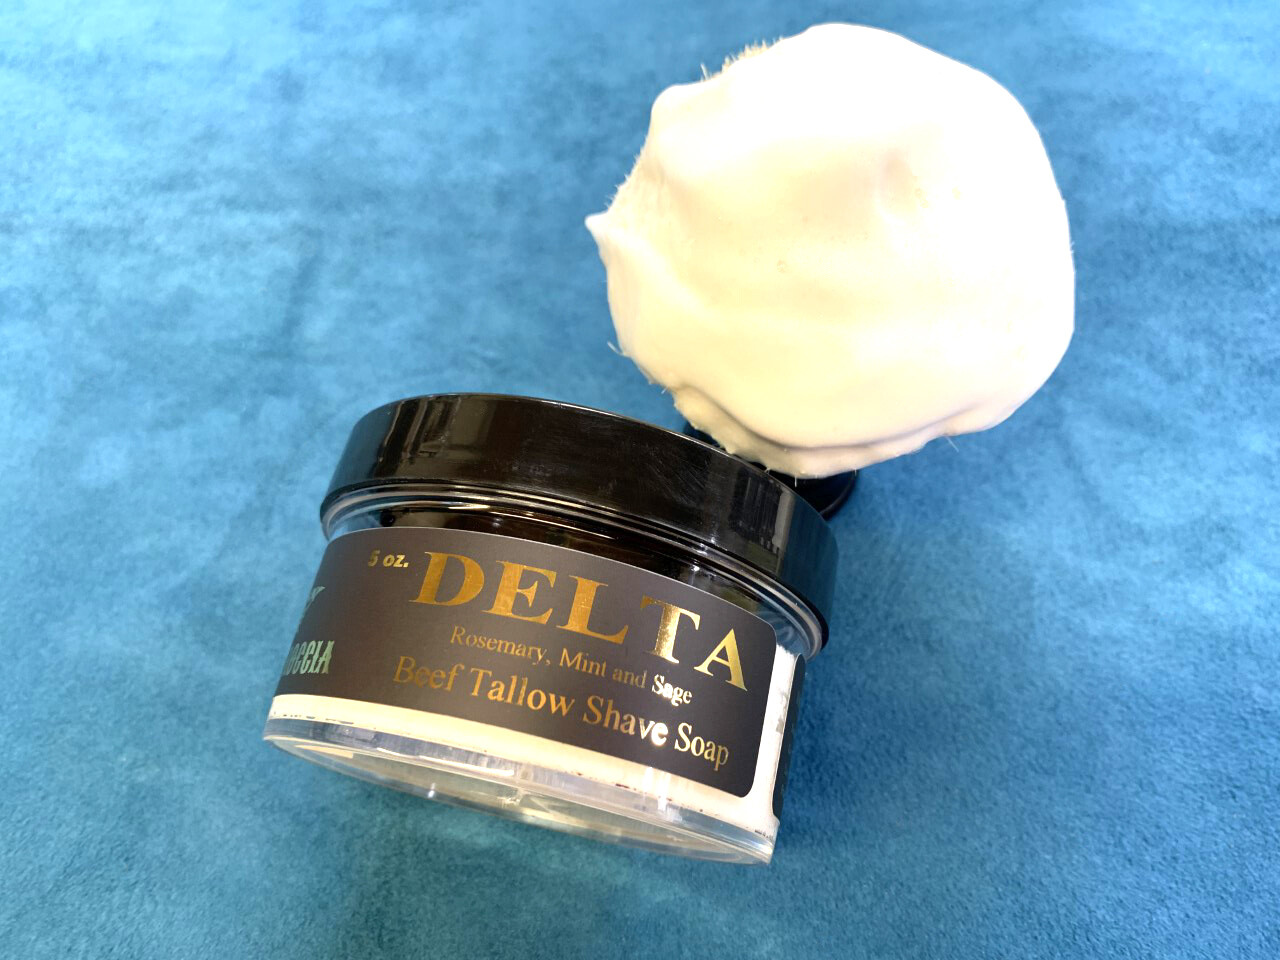 ILR DELTA Shave Soap 5 oz. (Rosemary, Mint, and Sage)